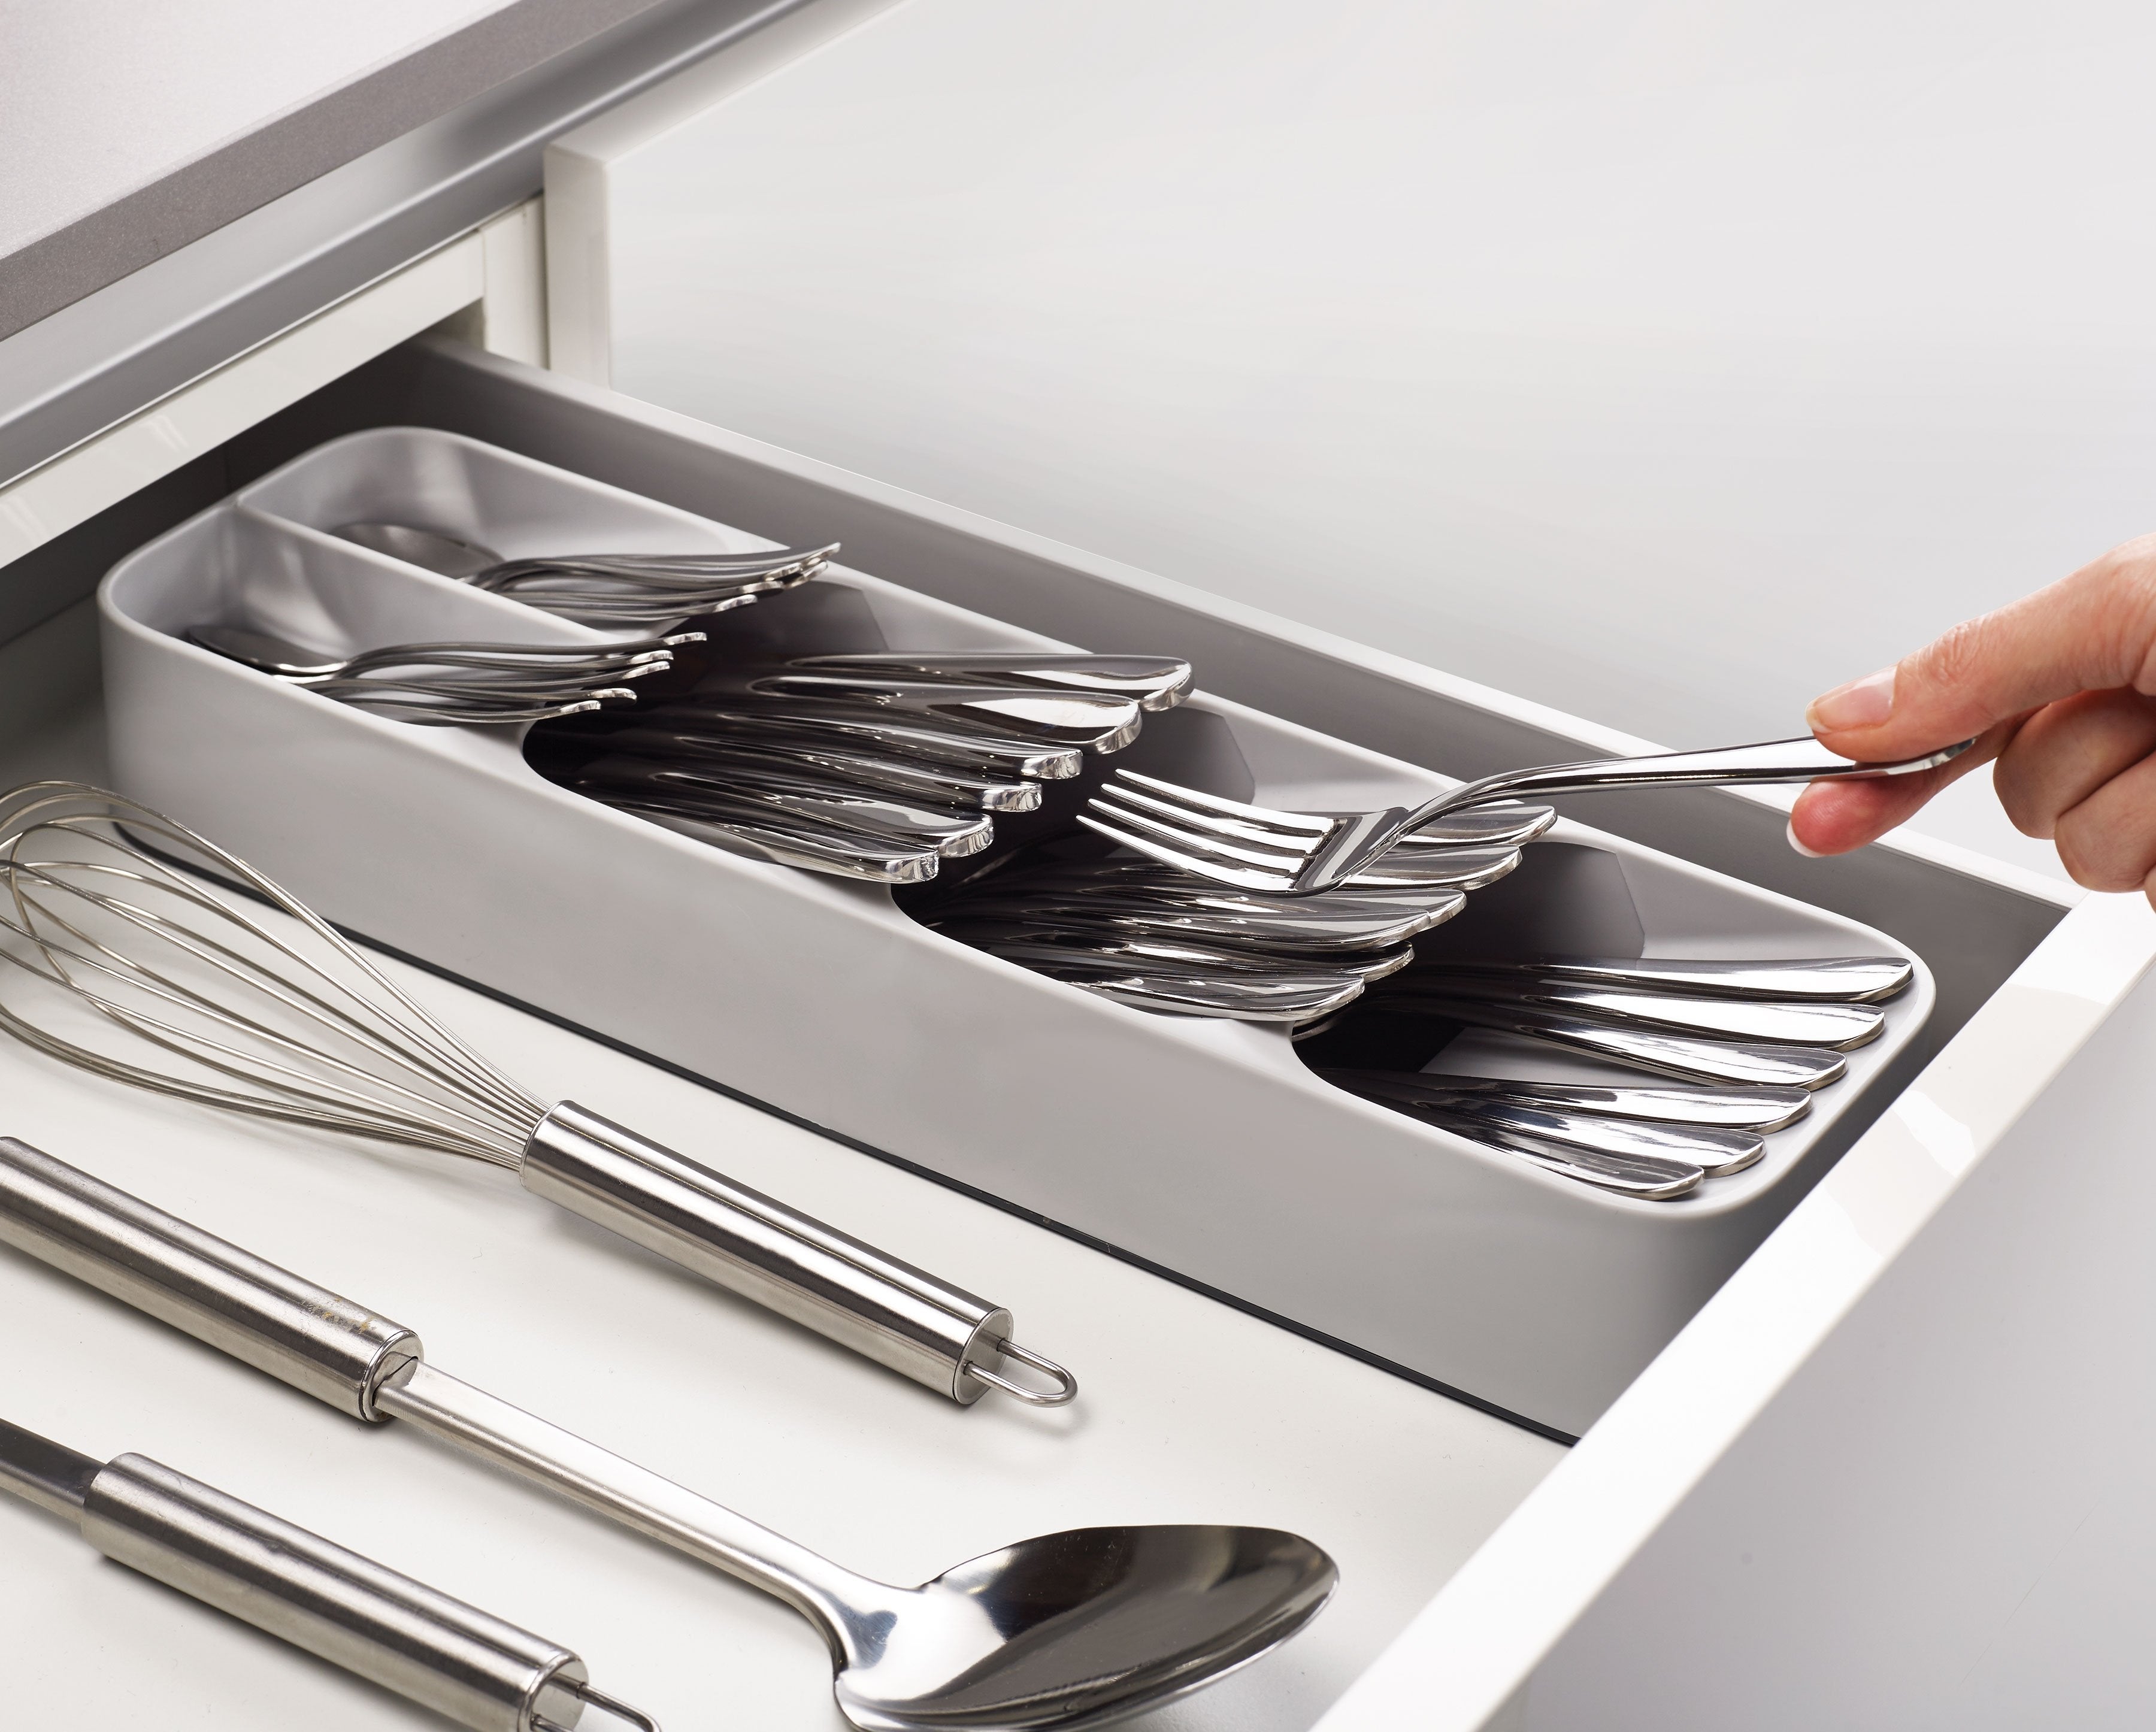 BEON.COM.AU  Keep your kitchen drawers in order with this compact storage solution. The unique tray features angled, over-lapping cutlery compartments that take up less room so you can combine two drawers into one.  Unique design creates more space in your drawer Individual, stacked compartments for differen... Joseph Joseph at BEON.COM.AU